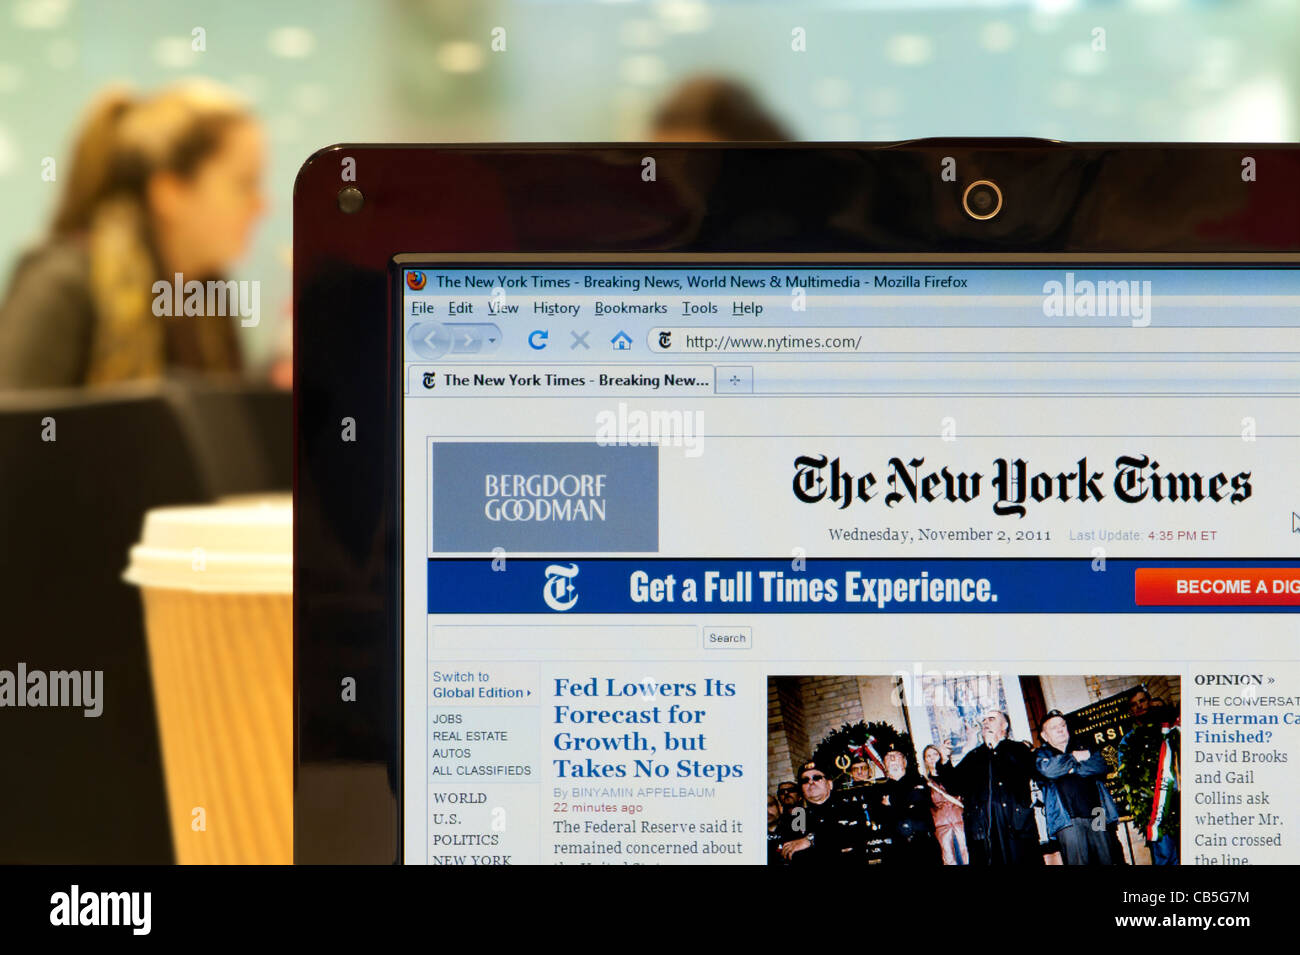 The New York Times website shot in a coffee shop environment (Editorial use only: print, TV, e-book and editorial website). Stock Photo